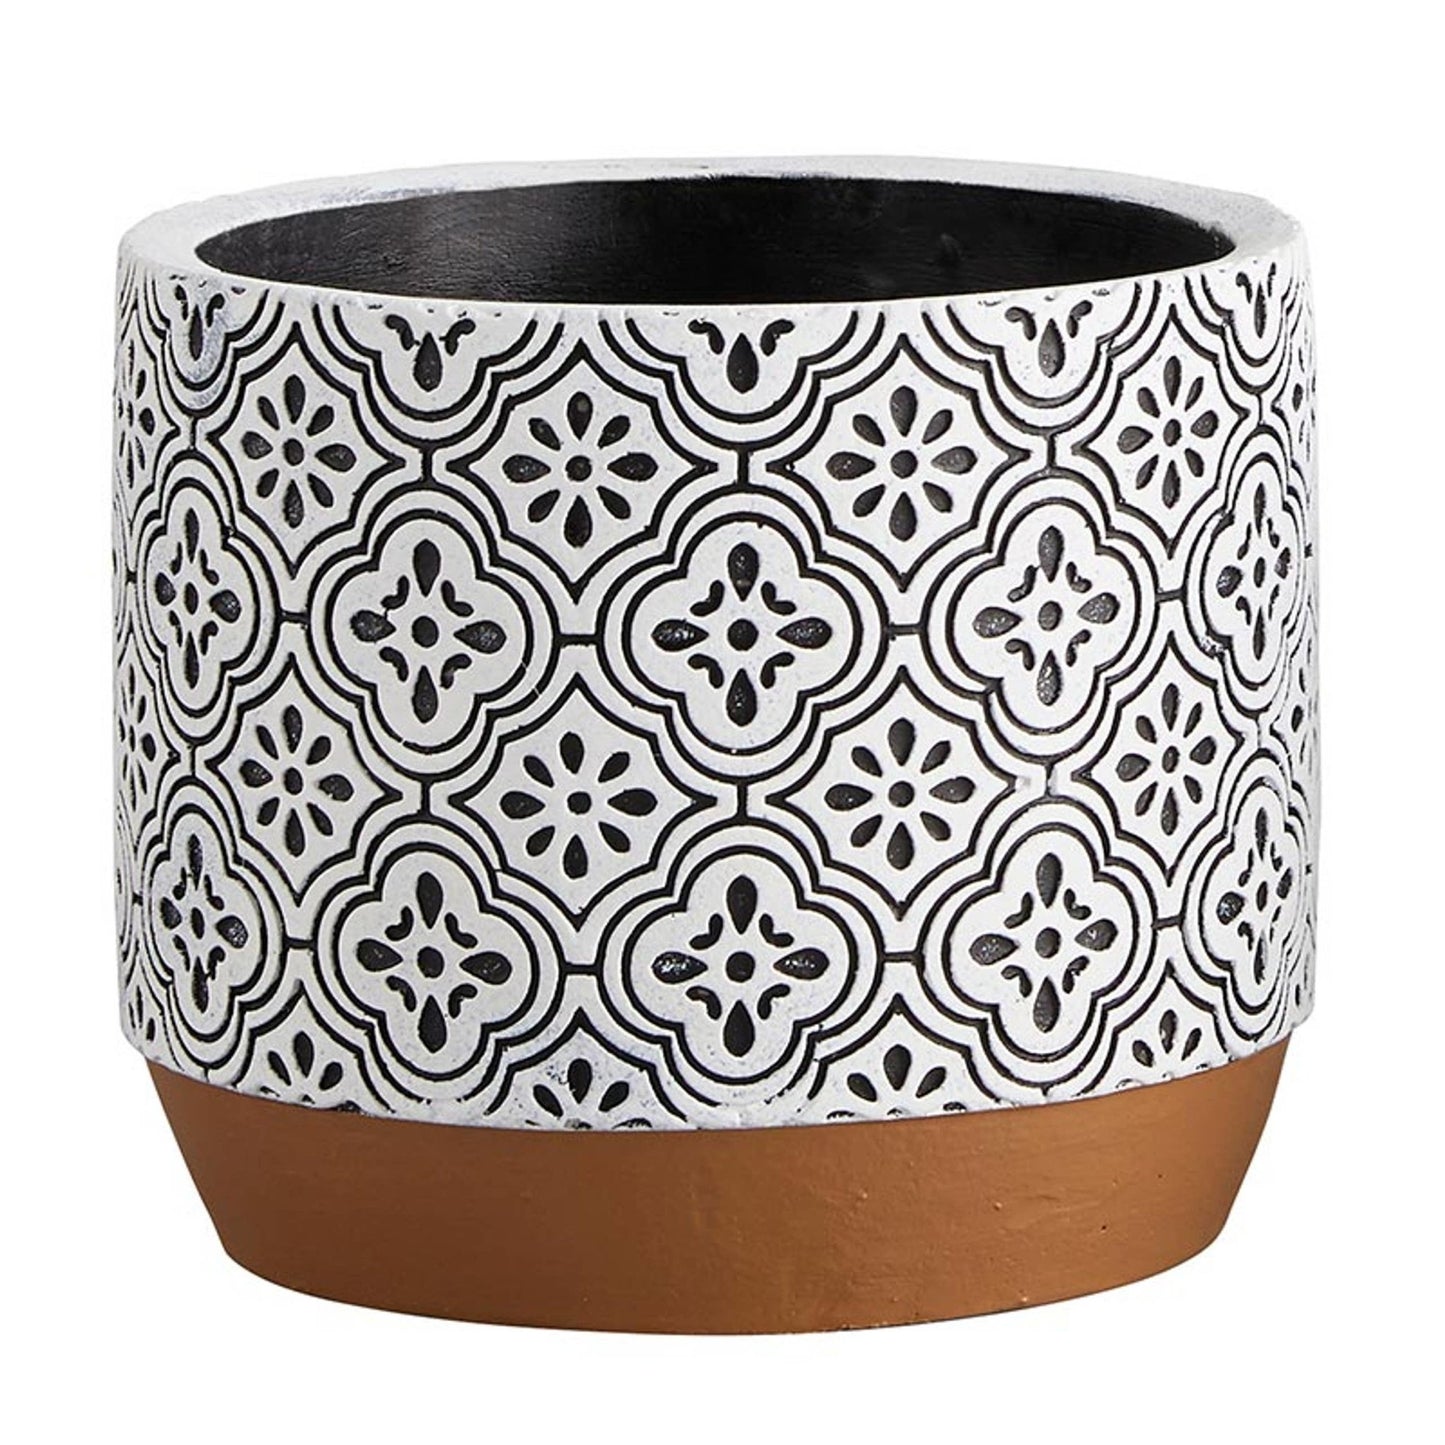 Black and White Floral Pot - Fenwick & OliverBlack and White Floral PotCement47th & Main (Creative Brands)Fenwick & OliverCMR637